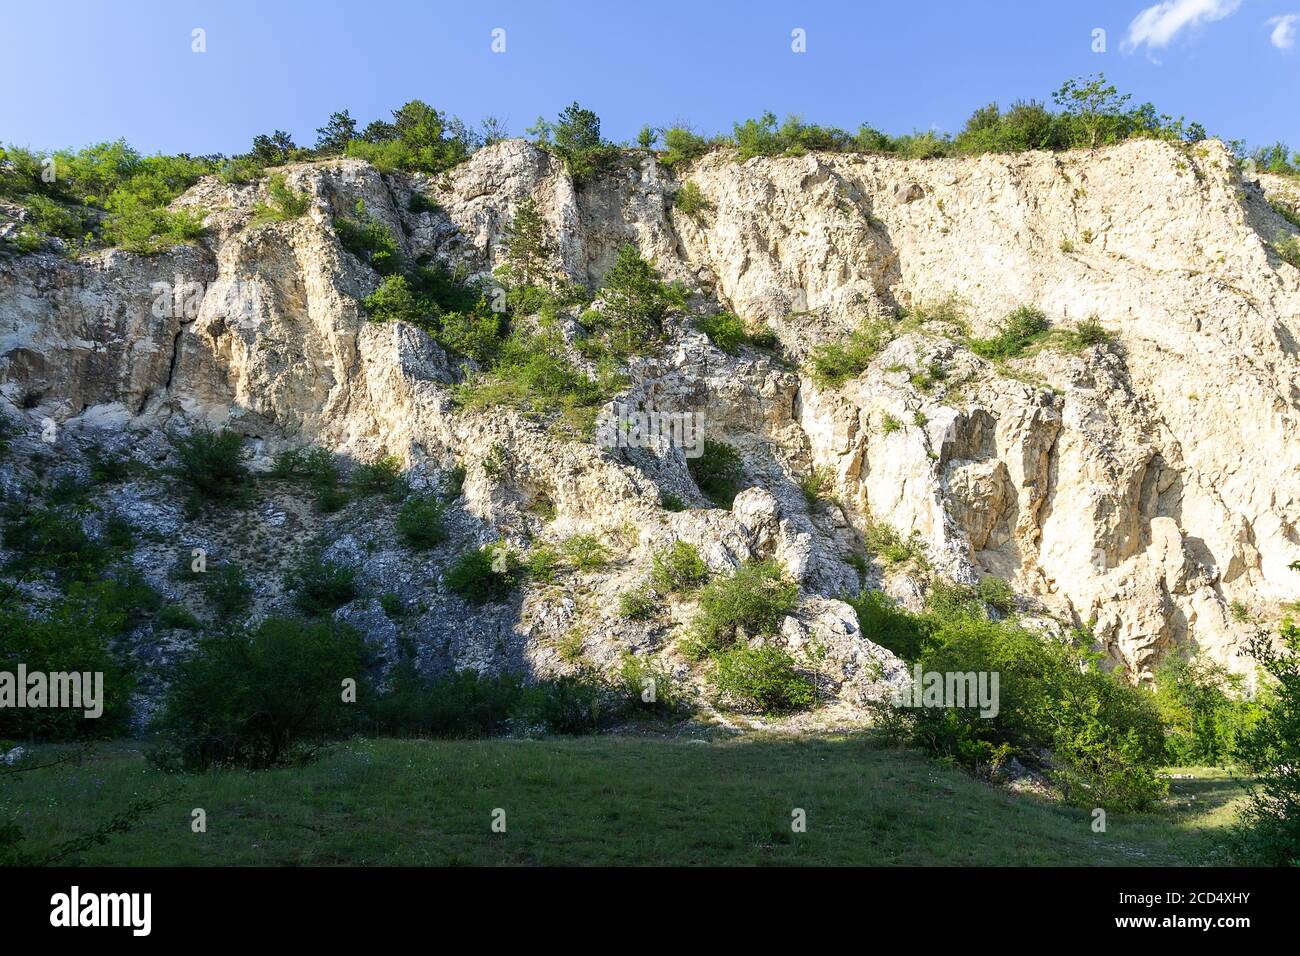 Quarry near village Perna. Calcite mountain with trees and grass. Palava, Czech republic Stock Photo